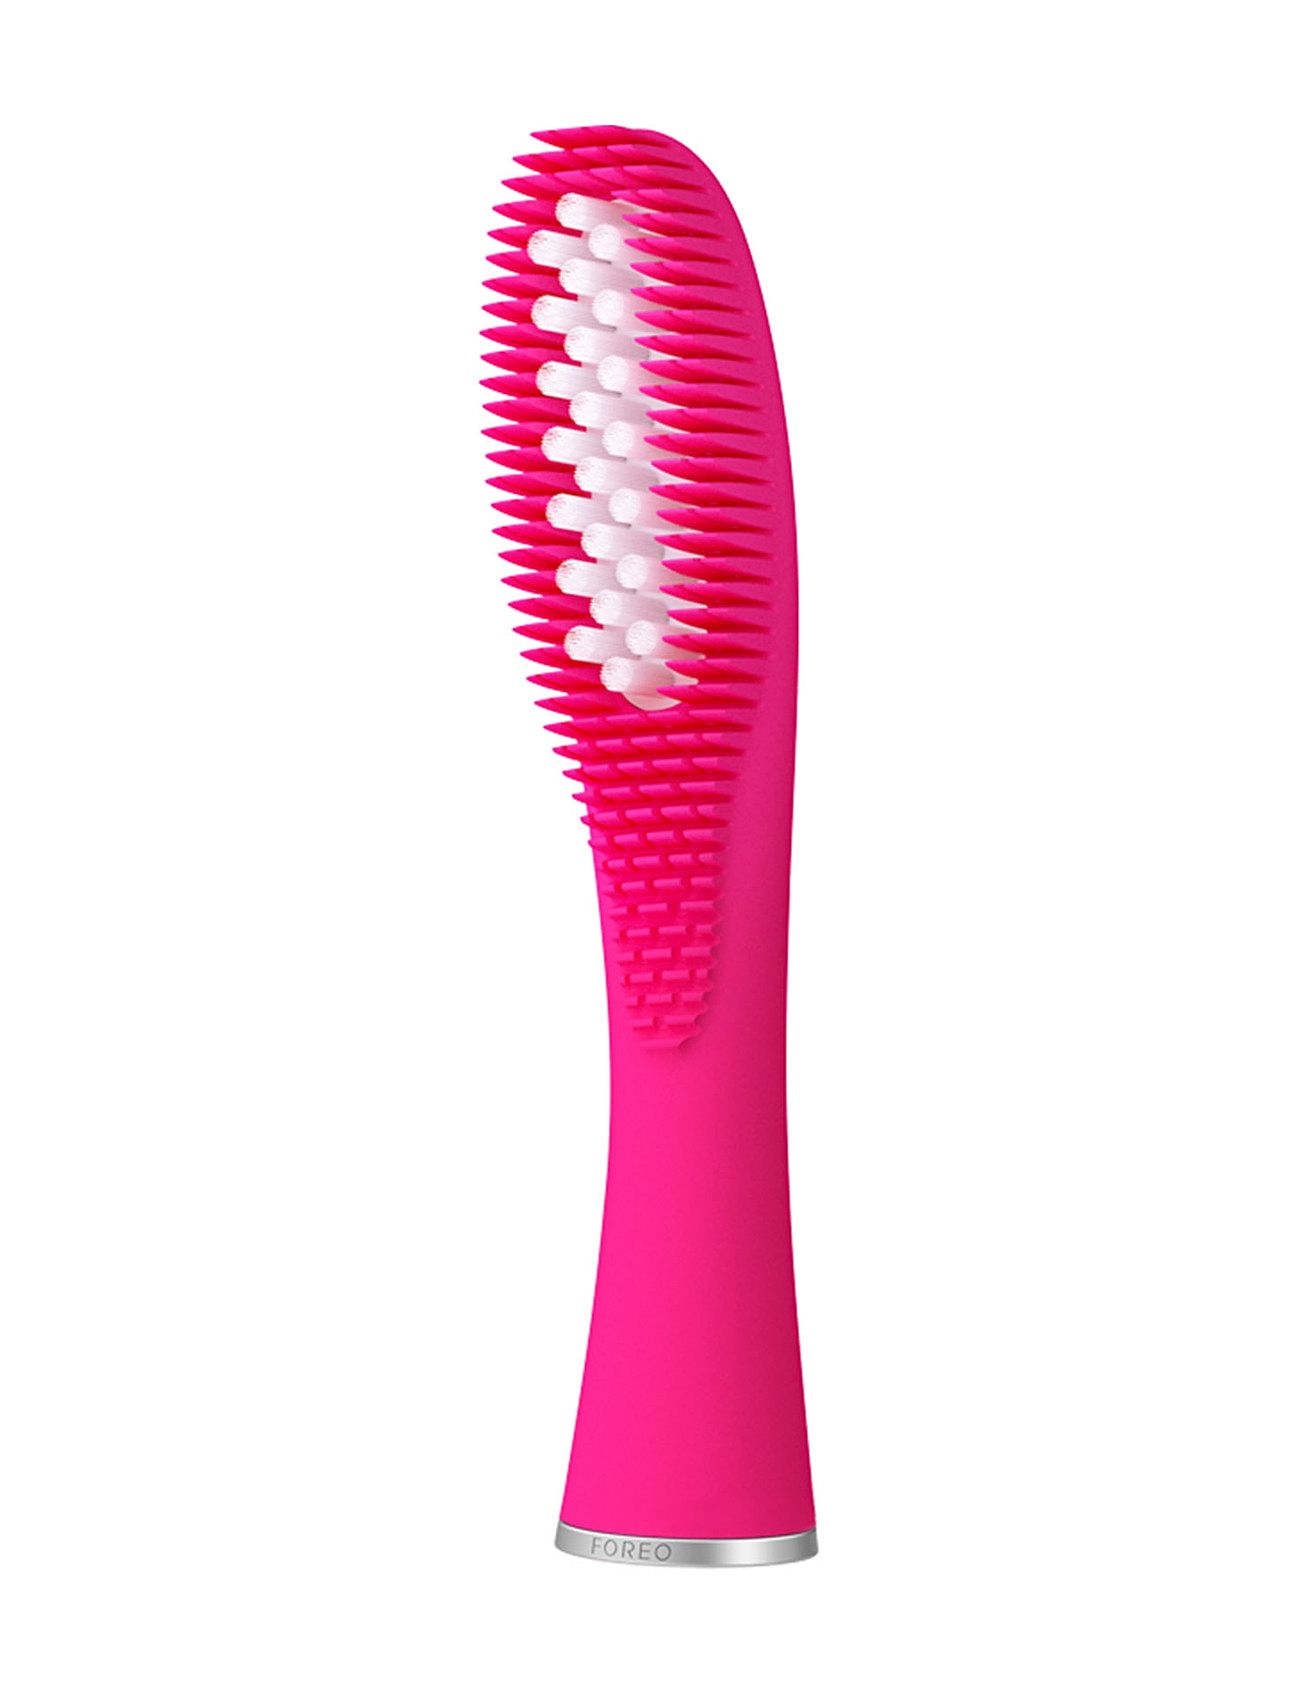 Issa™ Hybrid Wave Brush Head Beauty Women Home Oral Hygiene Toothbrushes Pink Foreo